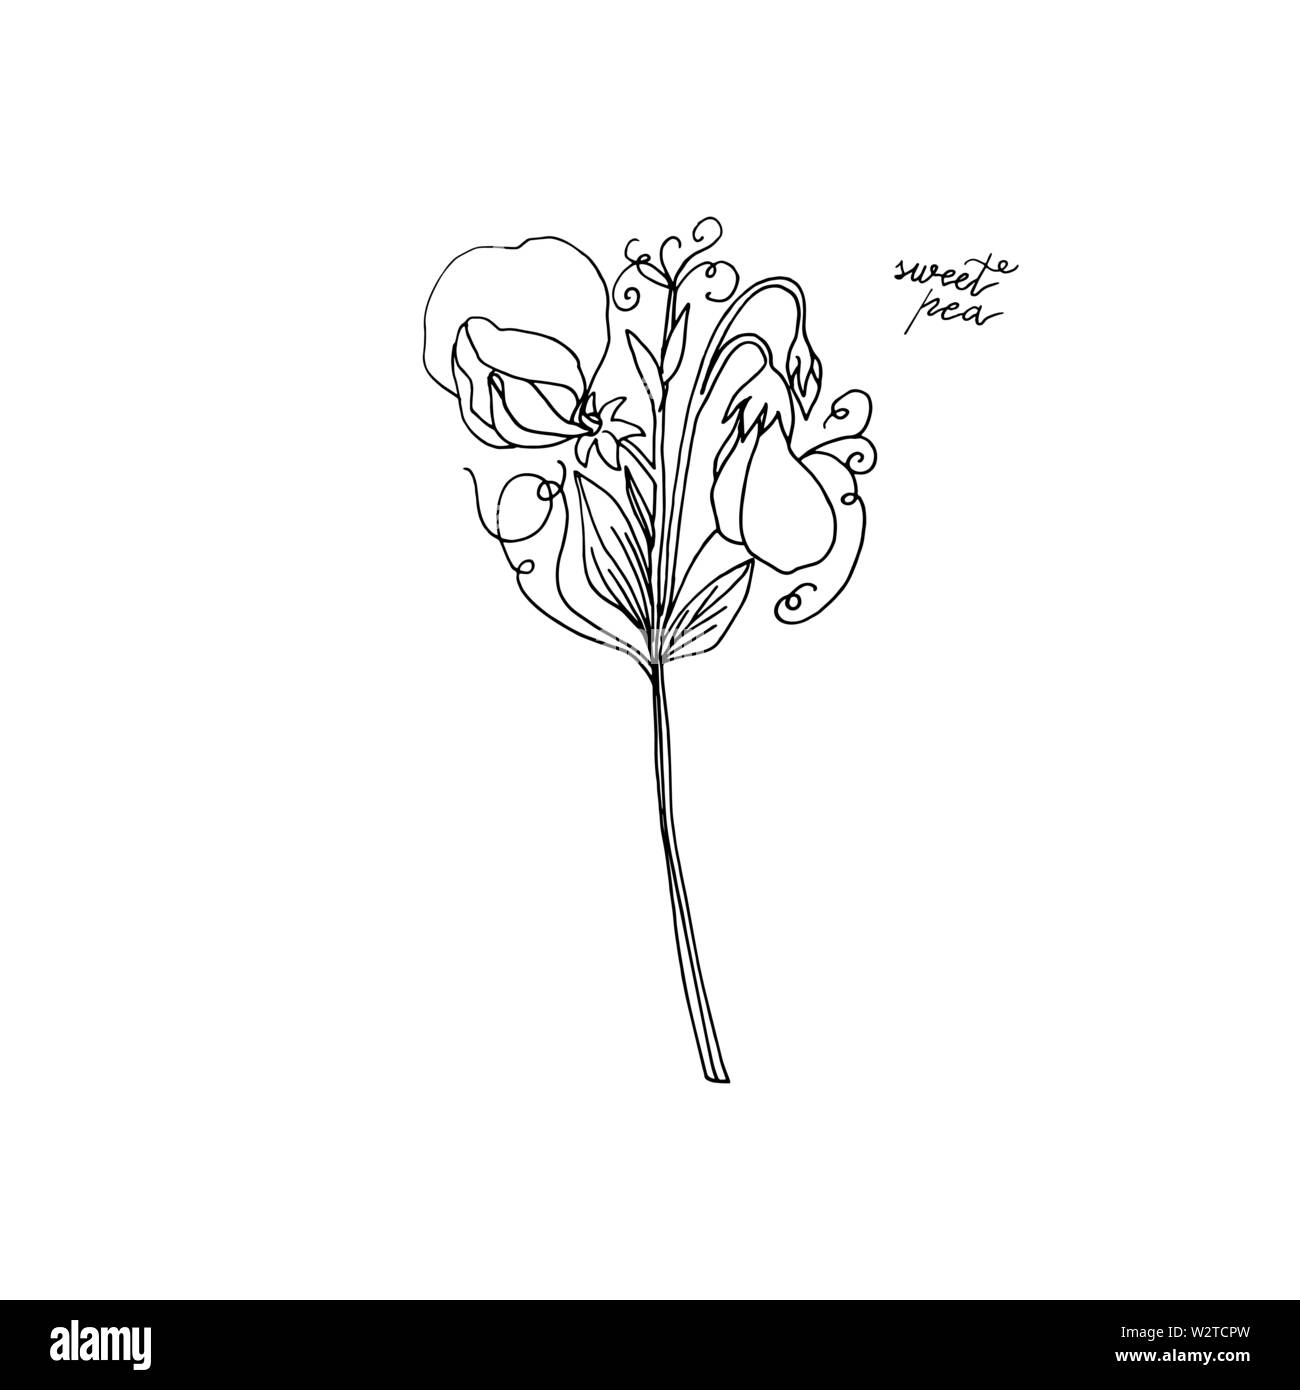 hand drawn sweet pea flower. floral design element isolated on white background. stock vector illustration. Stock Vector